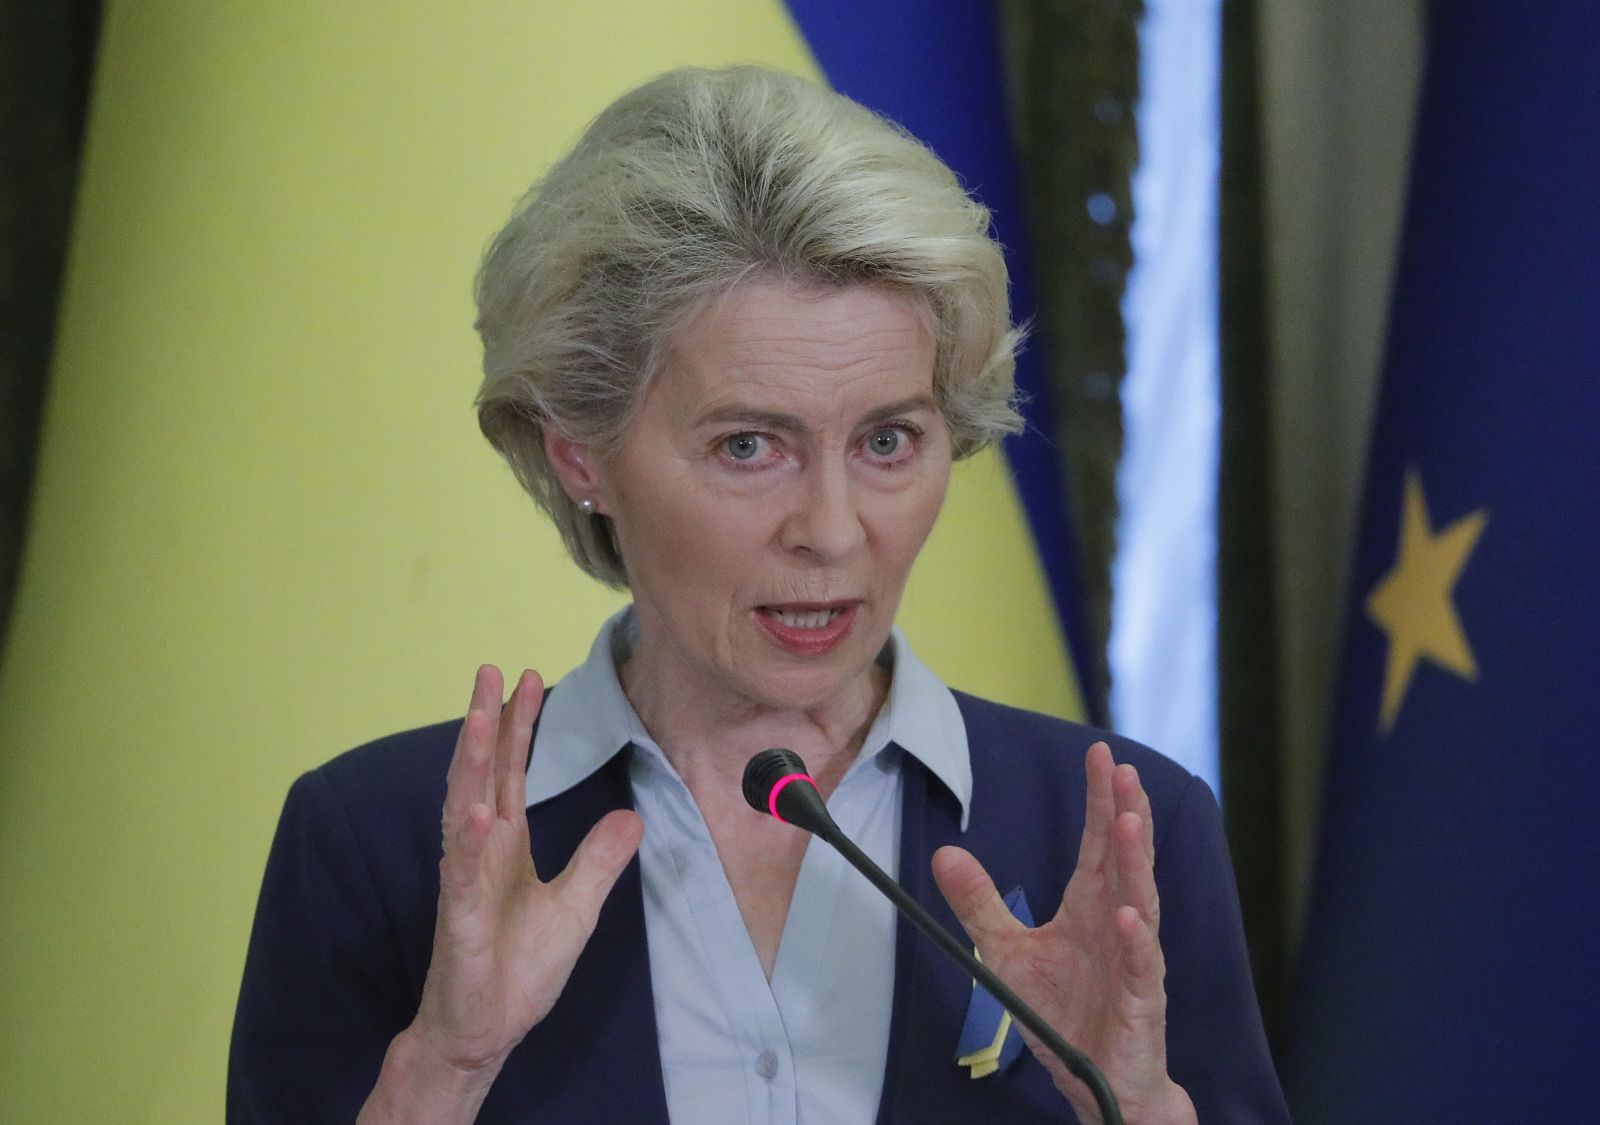 epa10007667 President of EU Commission Ursula von der Leyen giving her statement after meeting with Ukrainian President Volodymyr Zelensky in Kyiv, Ukraine, 11 June 2022. Ursula von der Leyen arrived in Kyiv for a working visit to meet with top officials and express their support for Ukraine amid the Russian invasion.  EPA/SERGEY DOLZHENKO